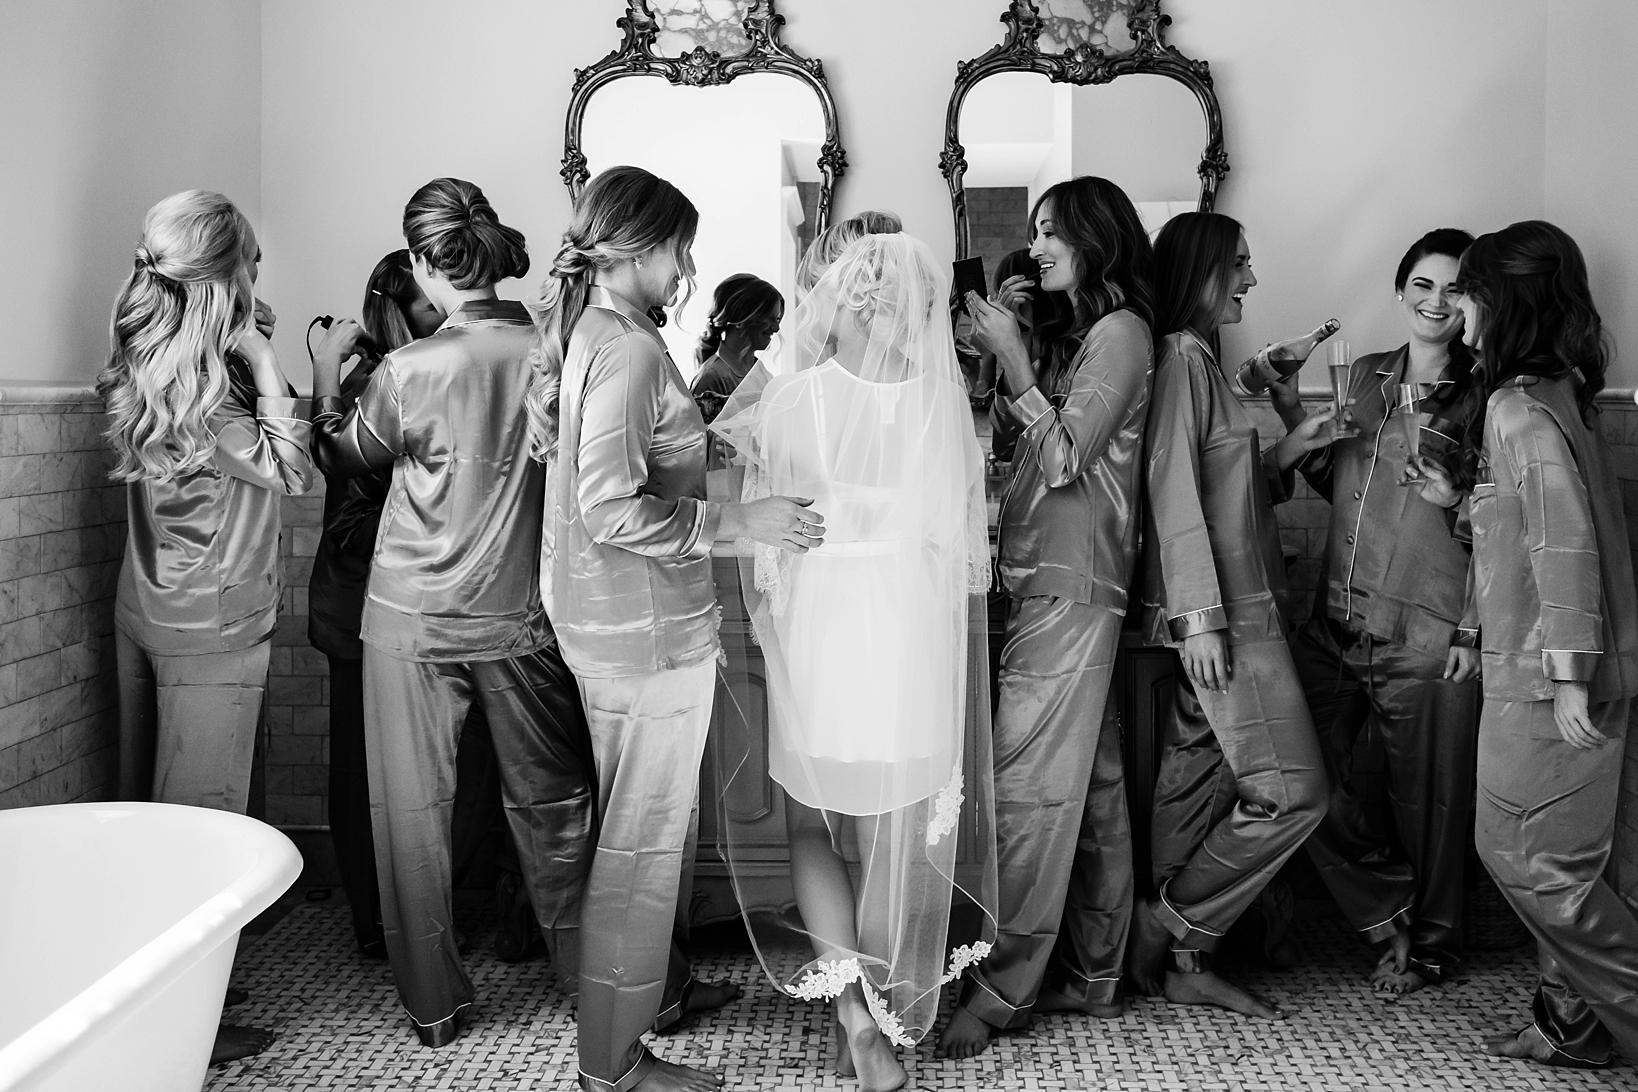 Classic black and white image of a bride and her bridesmaids getting ready for the wedding ceremony by Sarah & Ben Photography